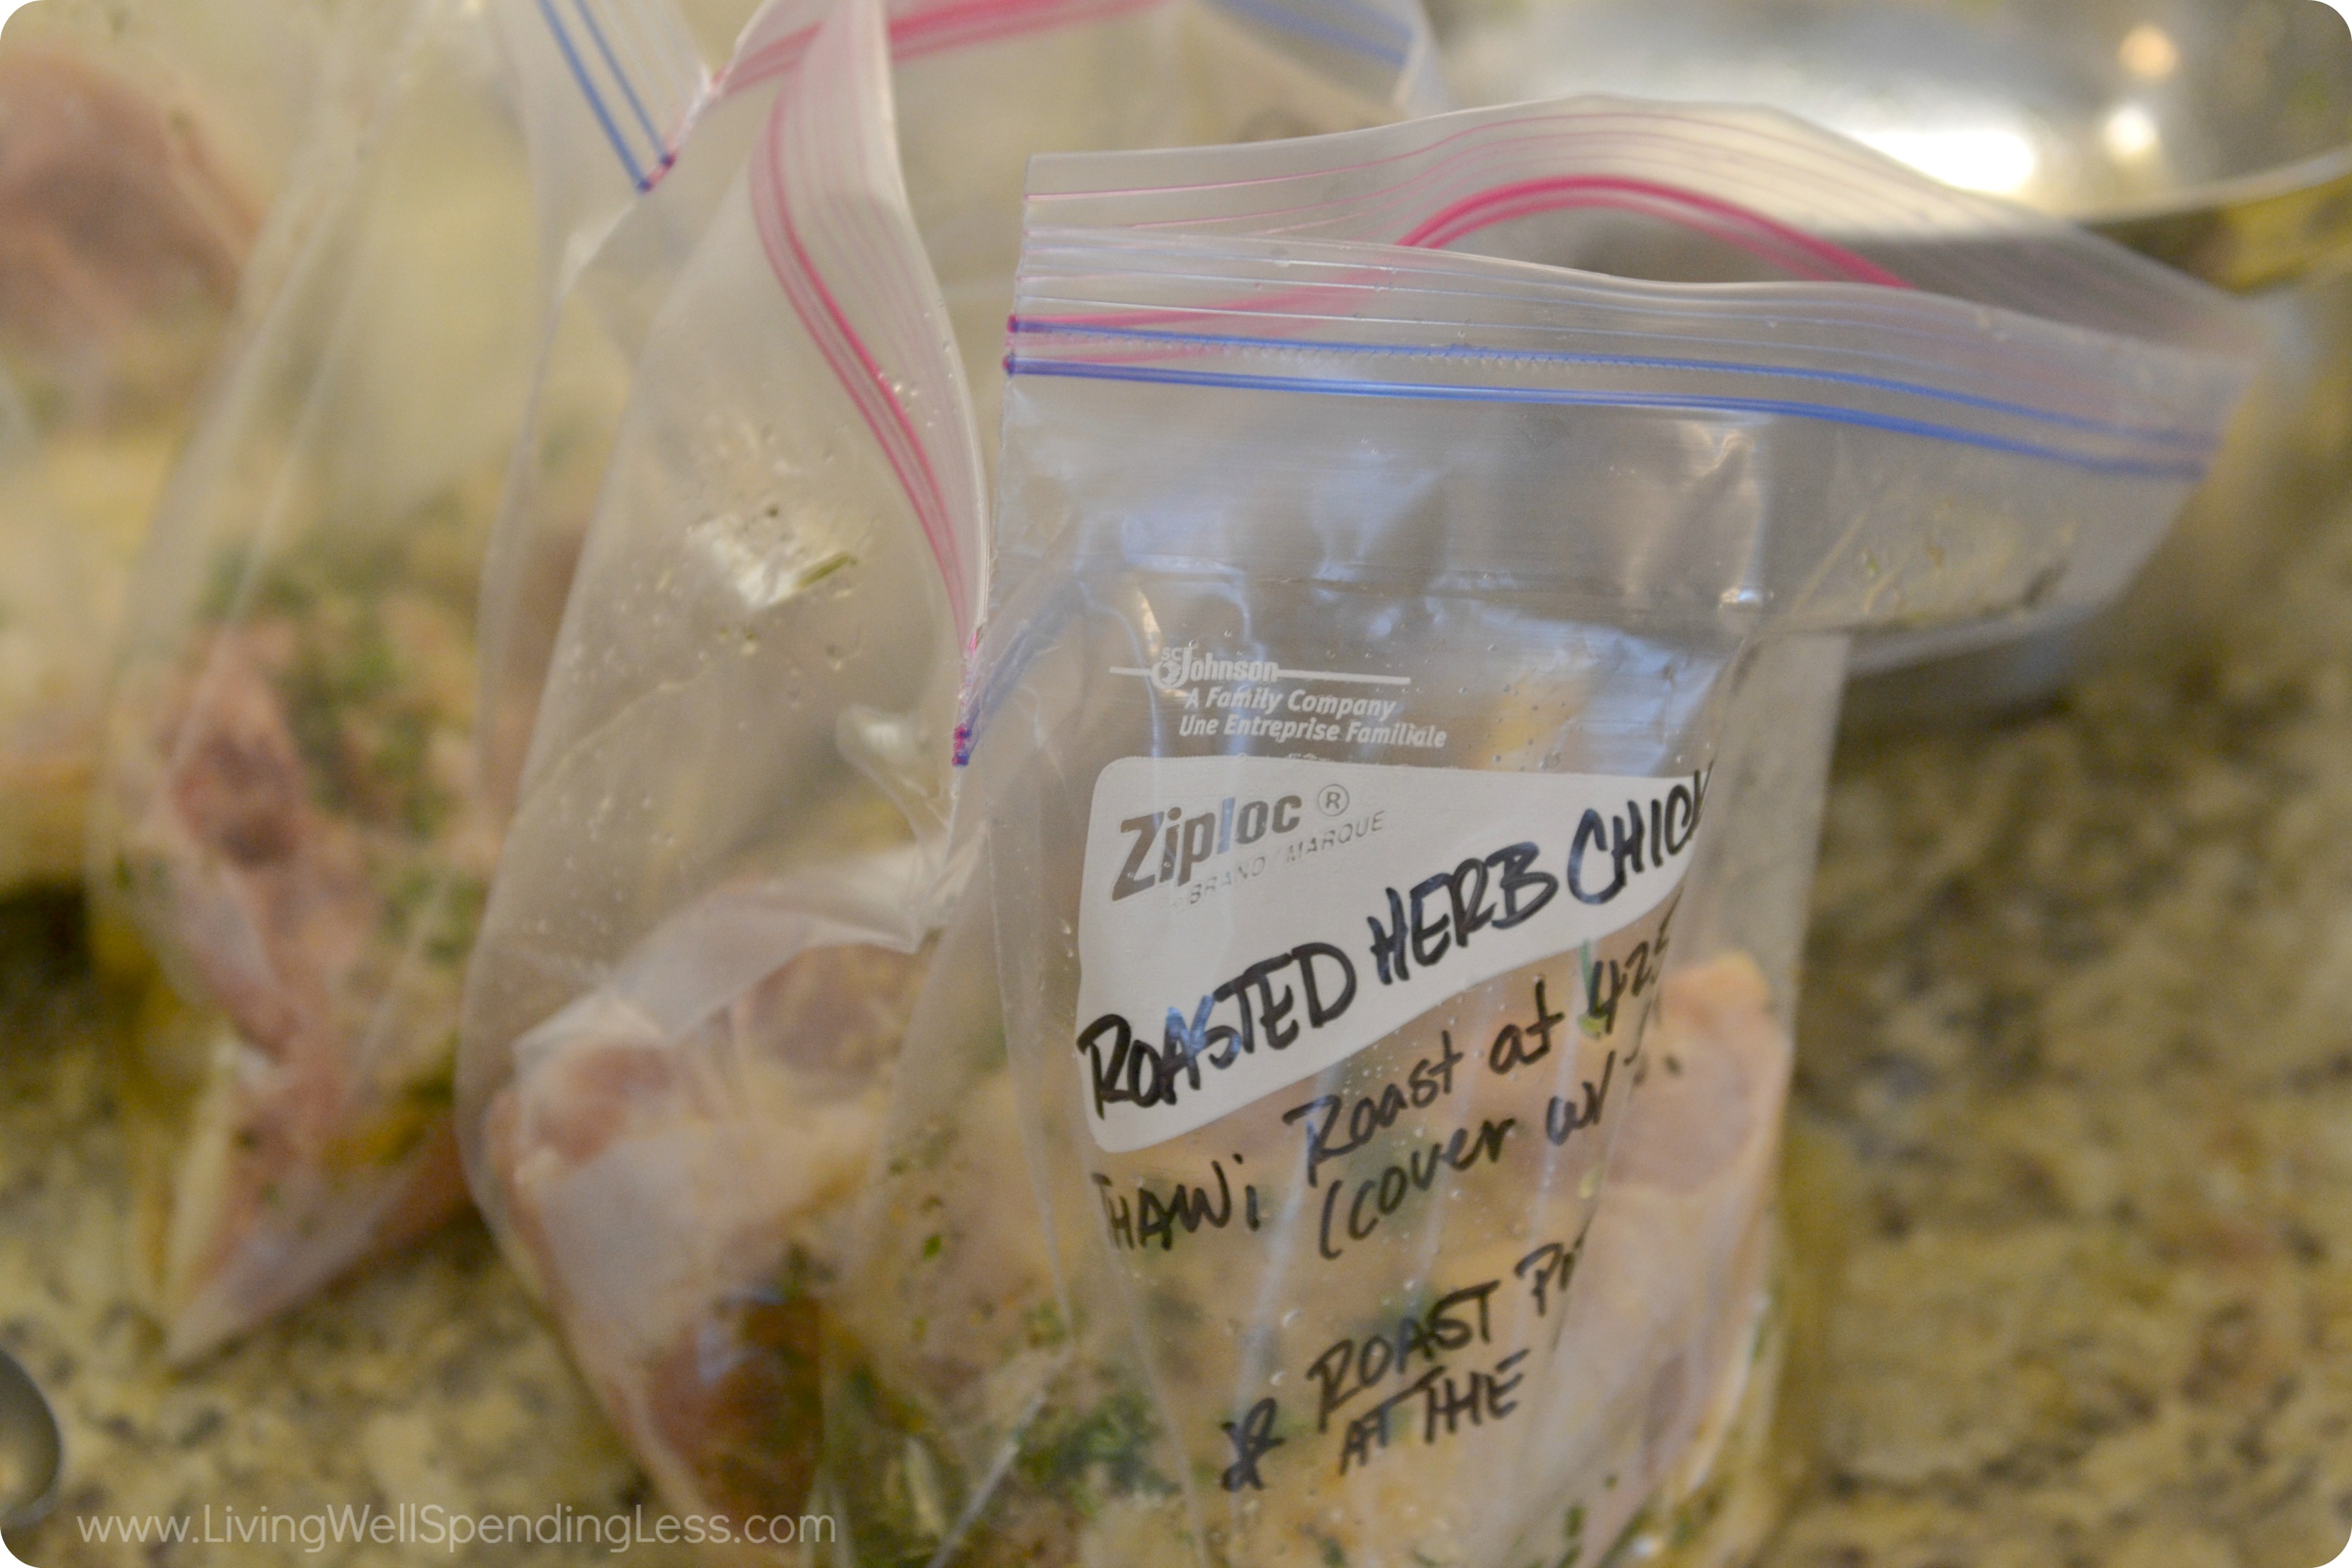 This herb roasted chicken is great for freezing! Simply divide the mixture into freezer bags and label. 